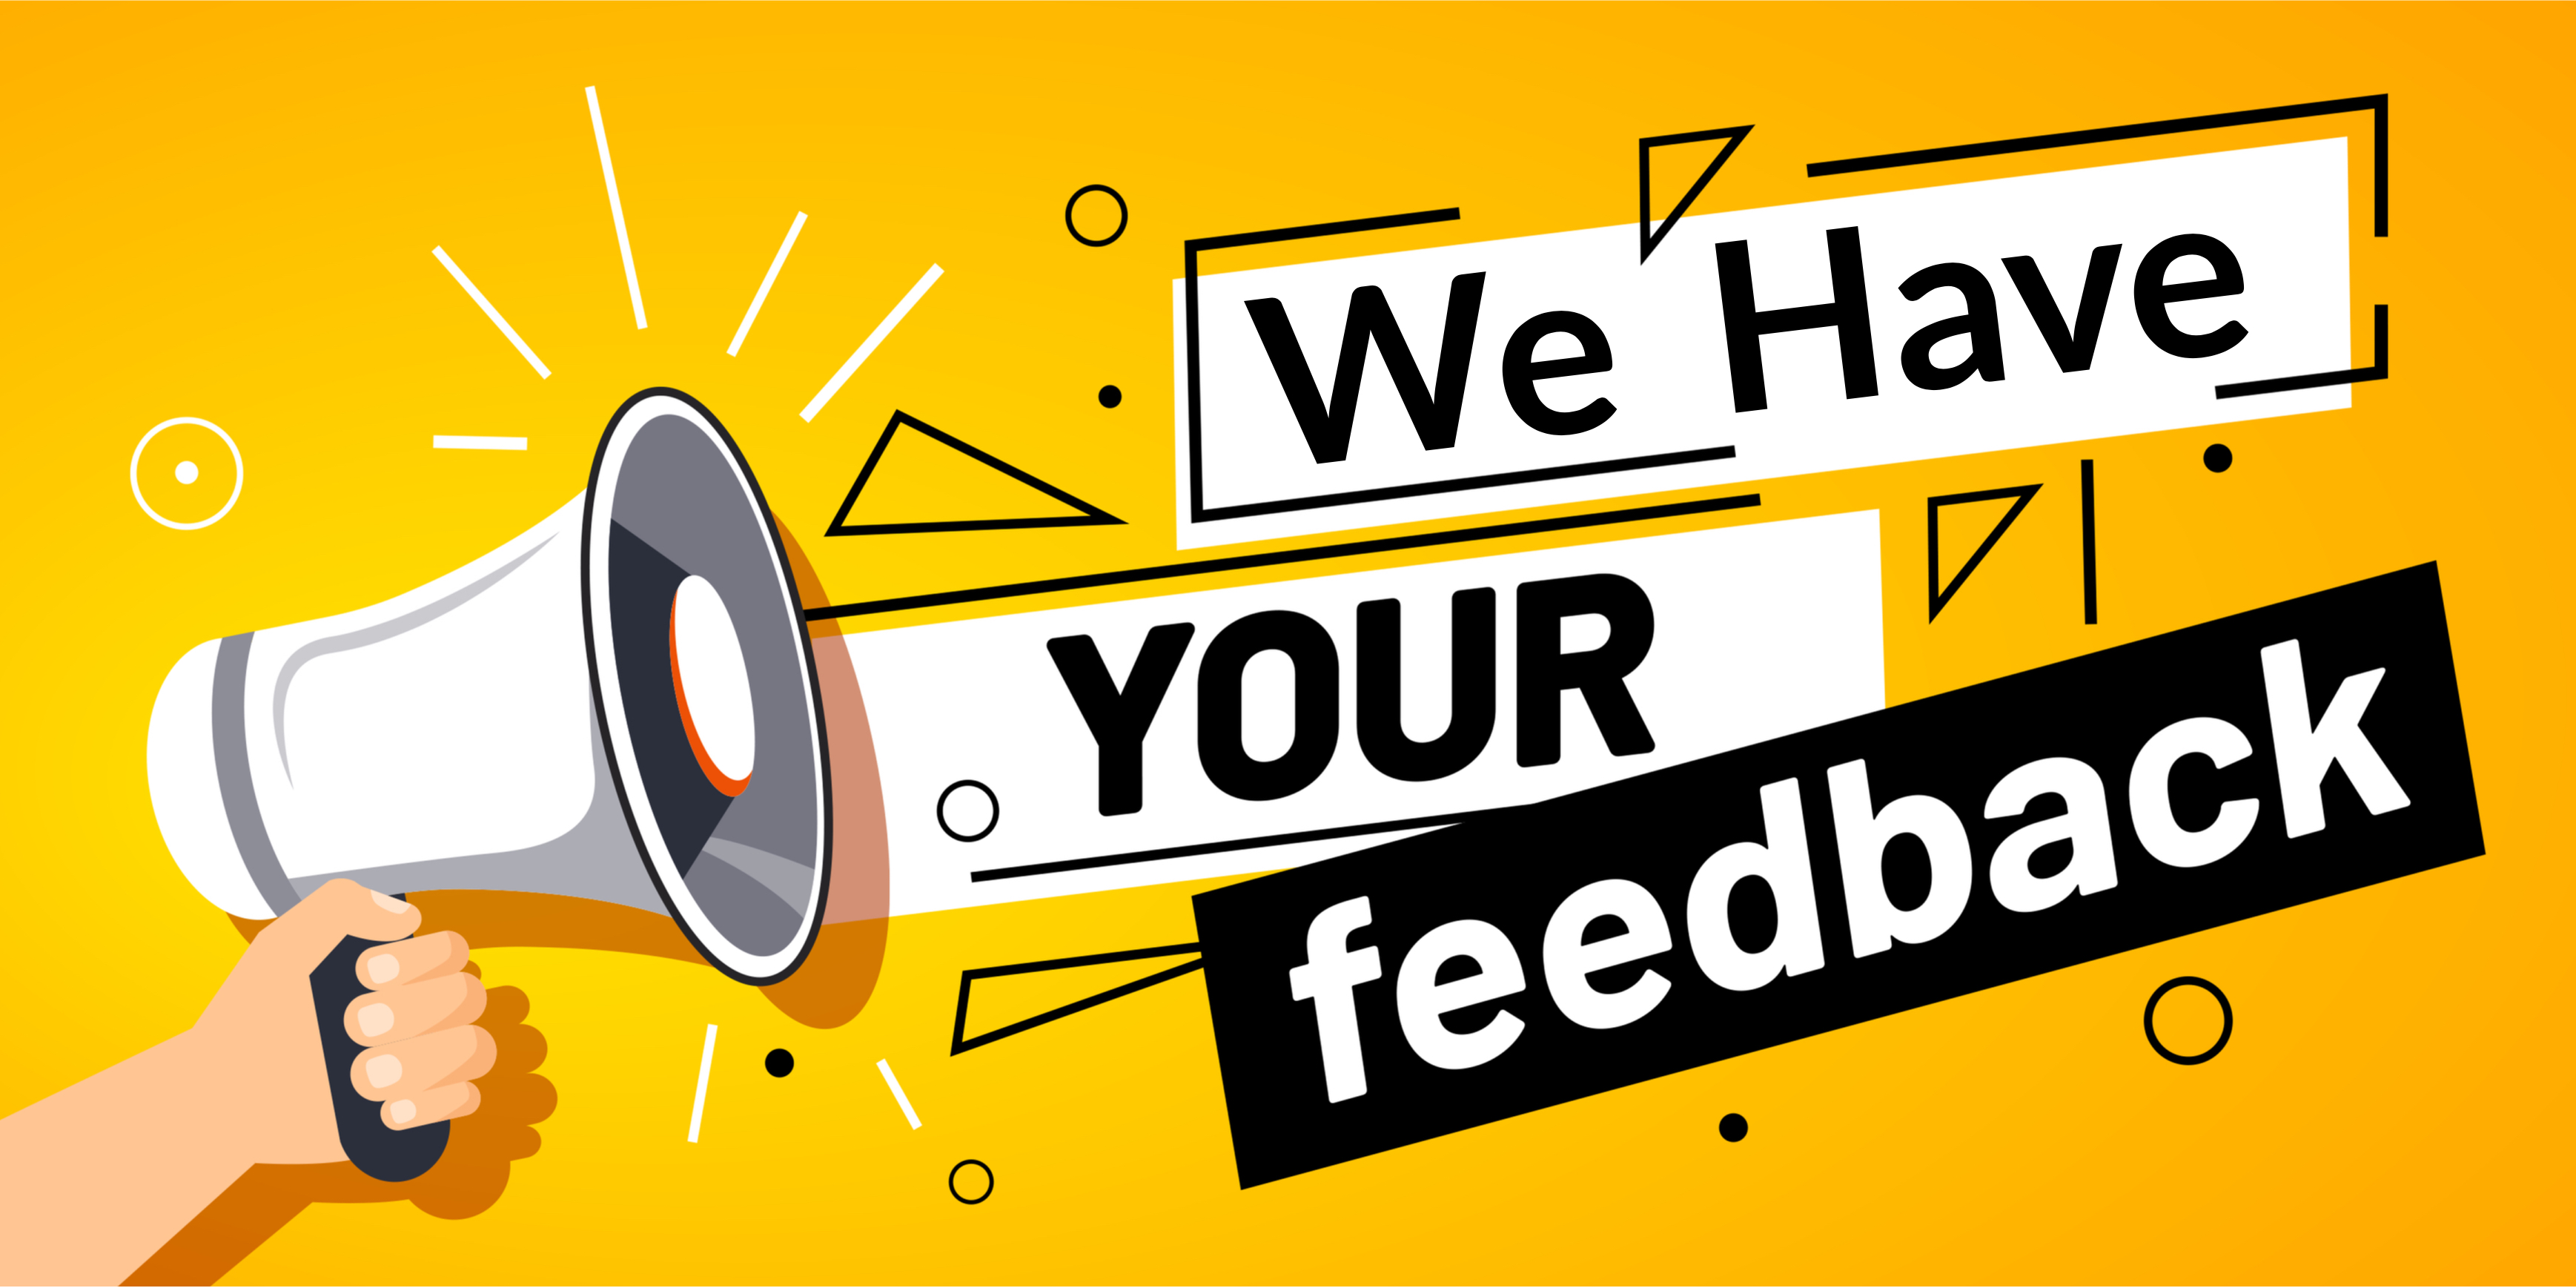 We have your feedback